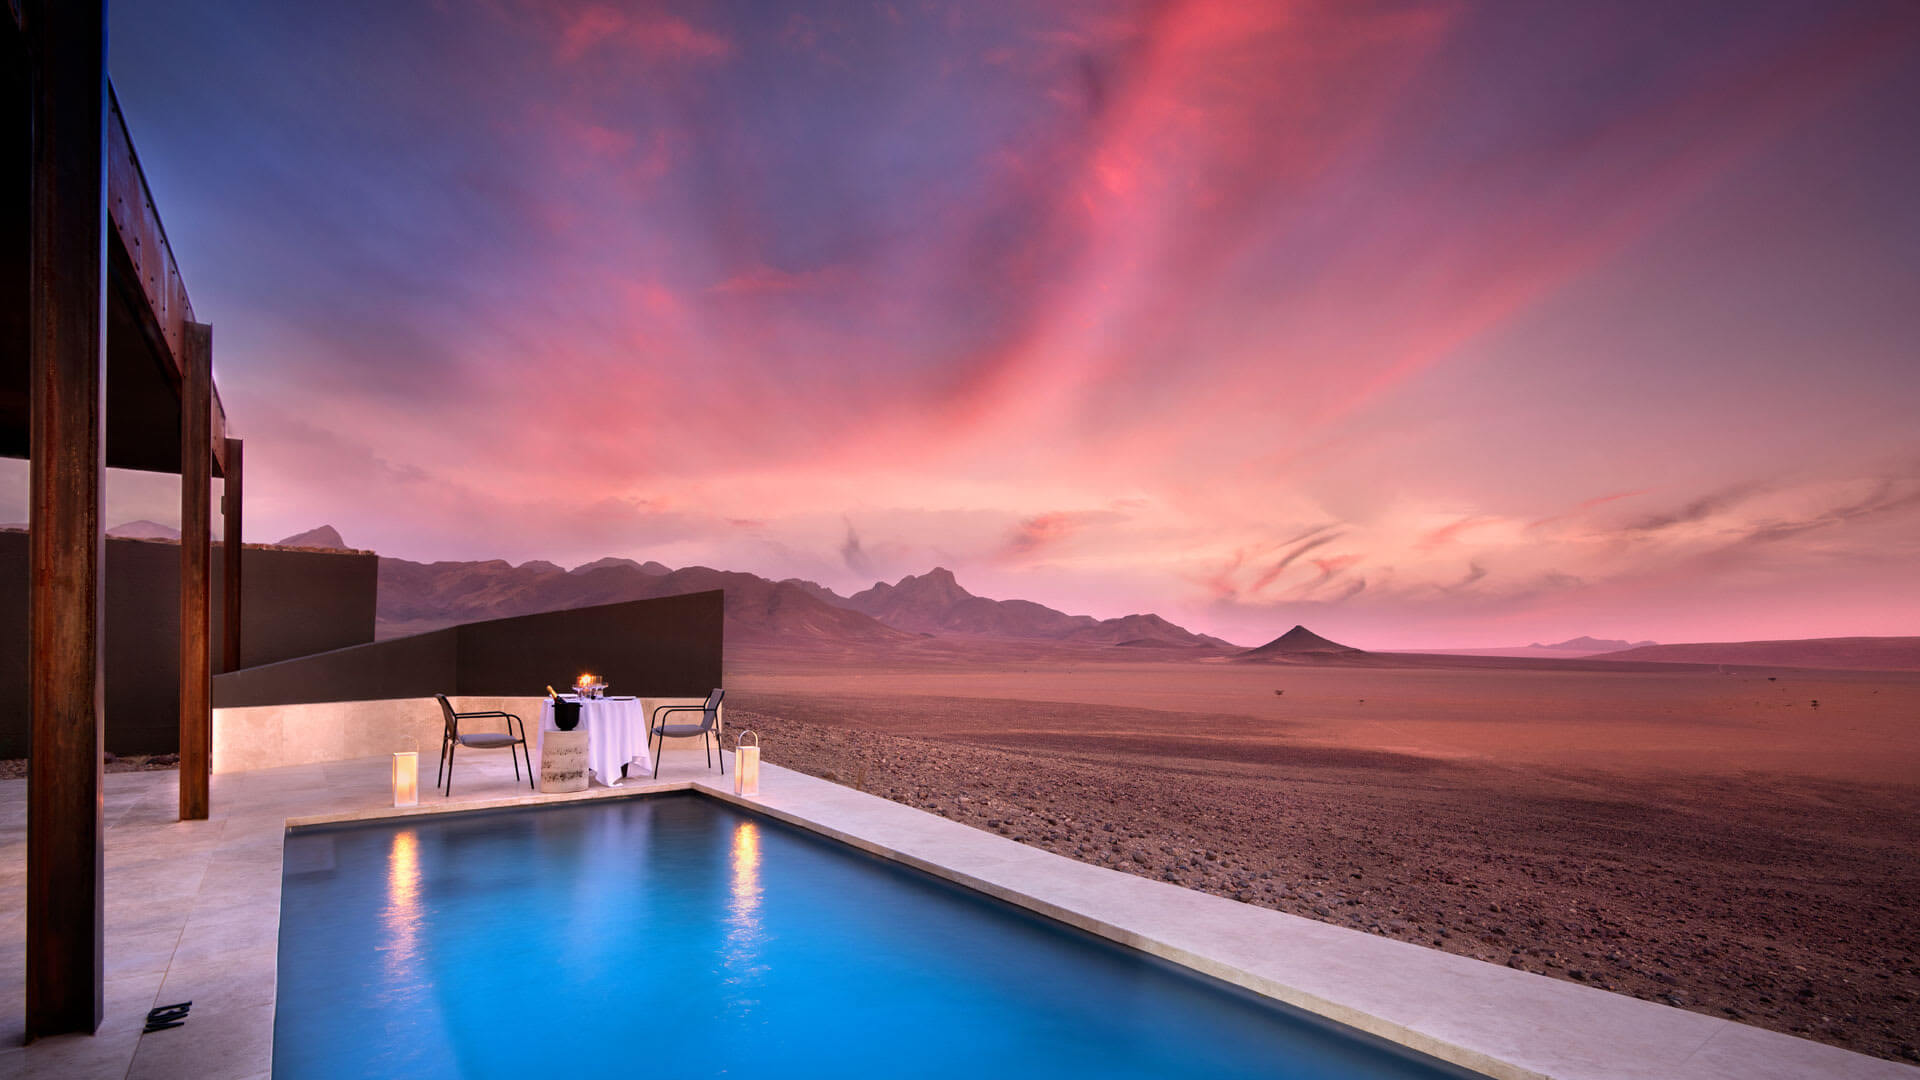 Swimming pool with te desert in the background as the sunsets with a pink sky